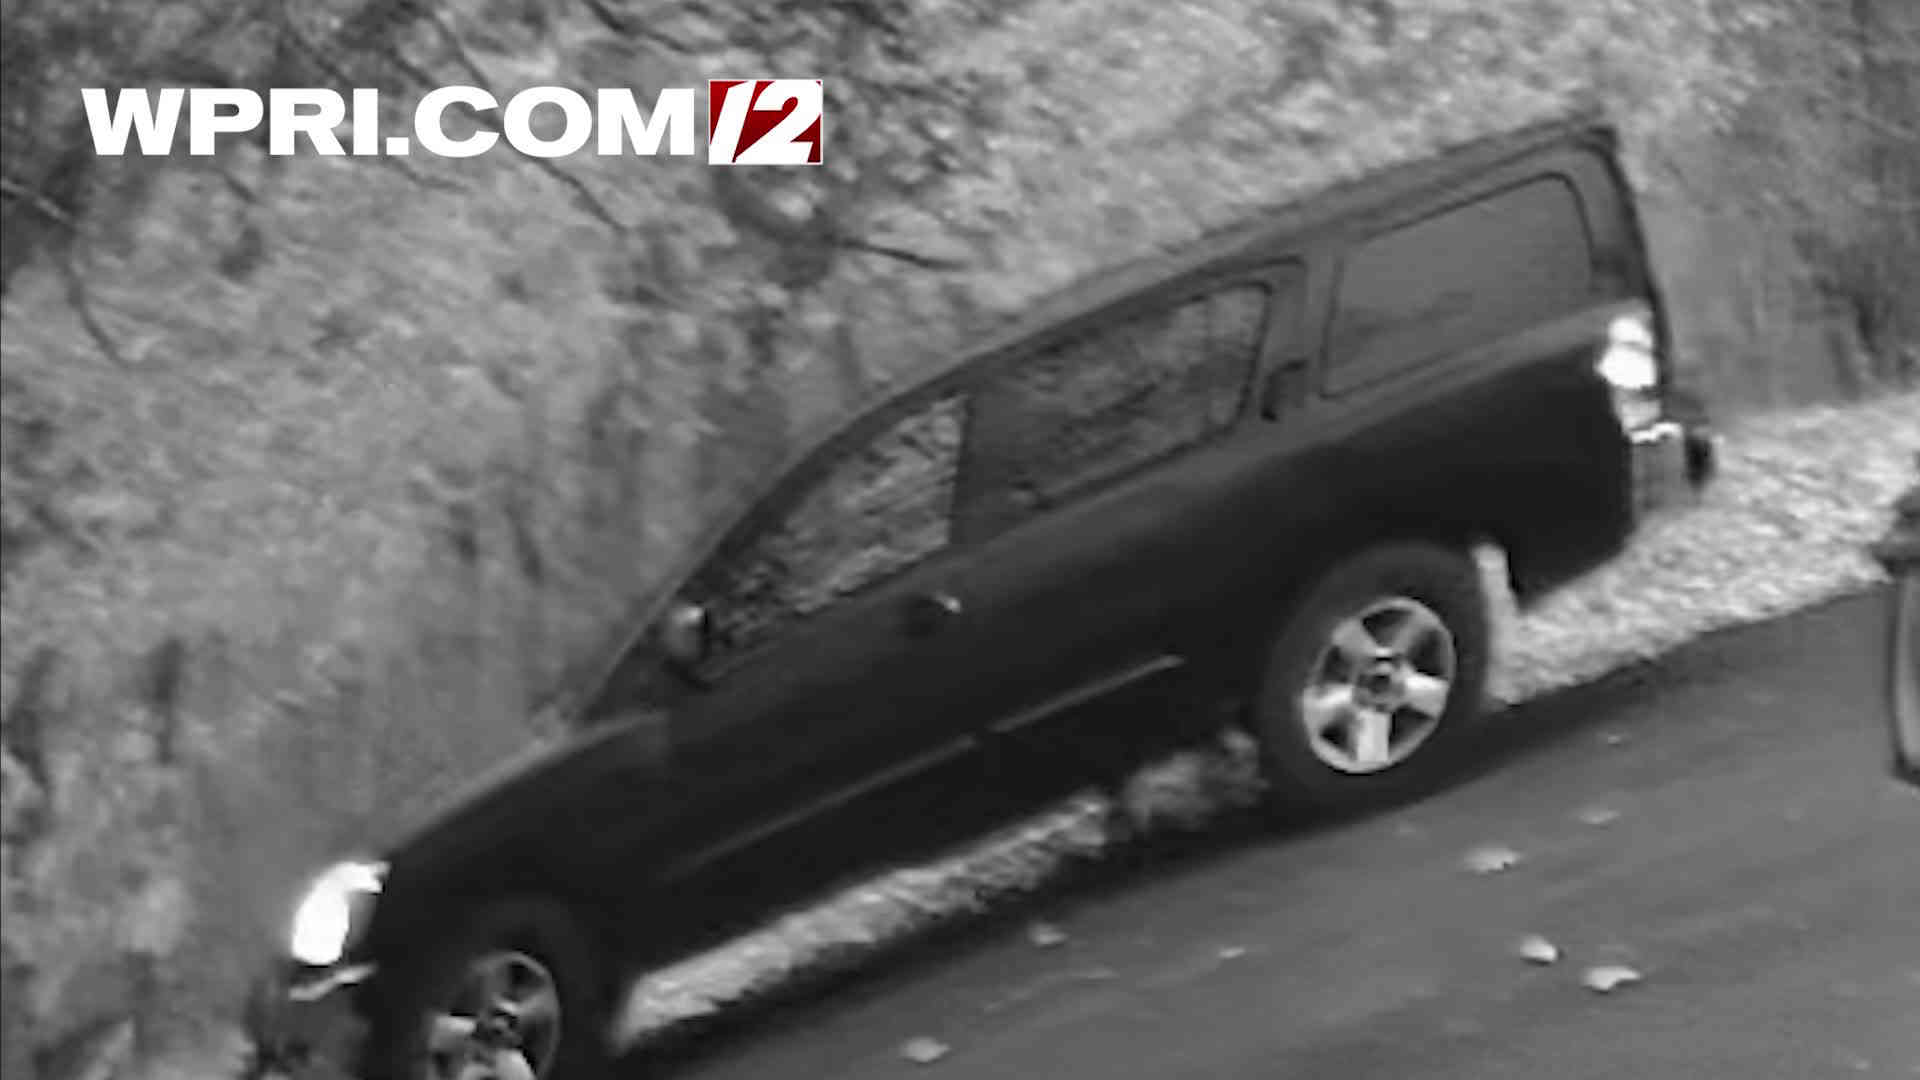 EXCLUSIVE Surveillance video from Friday's highspeed chase